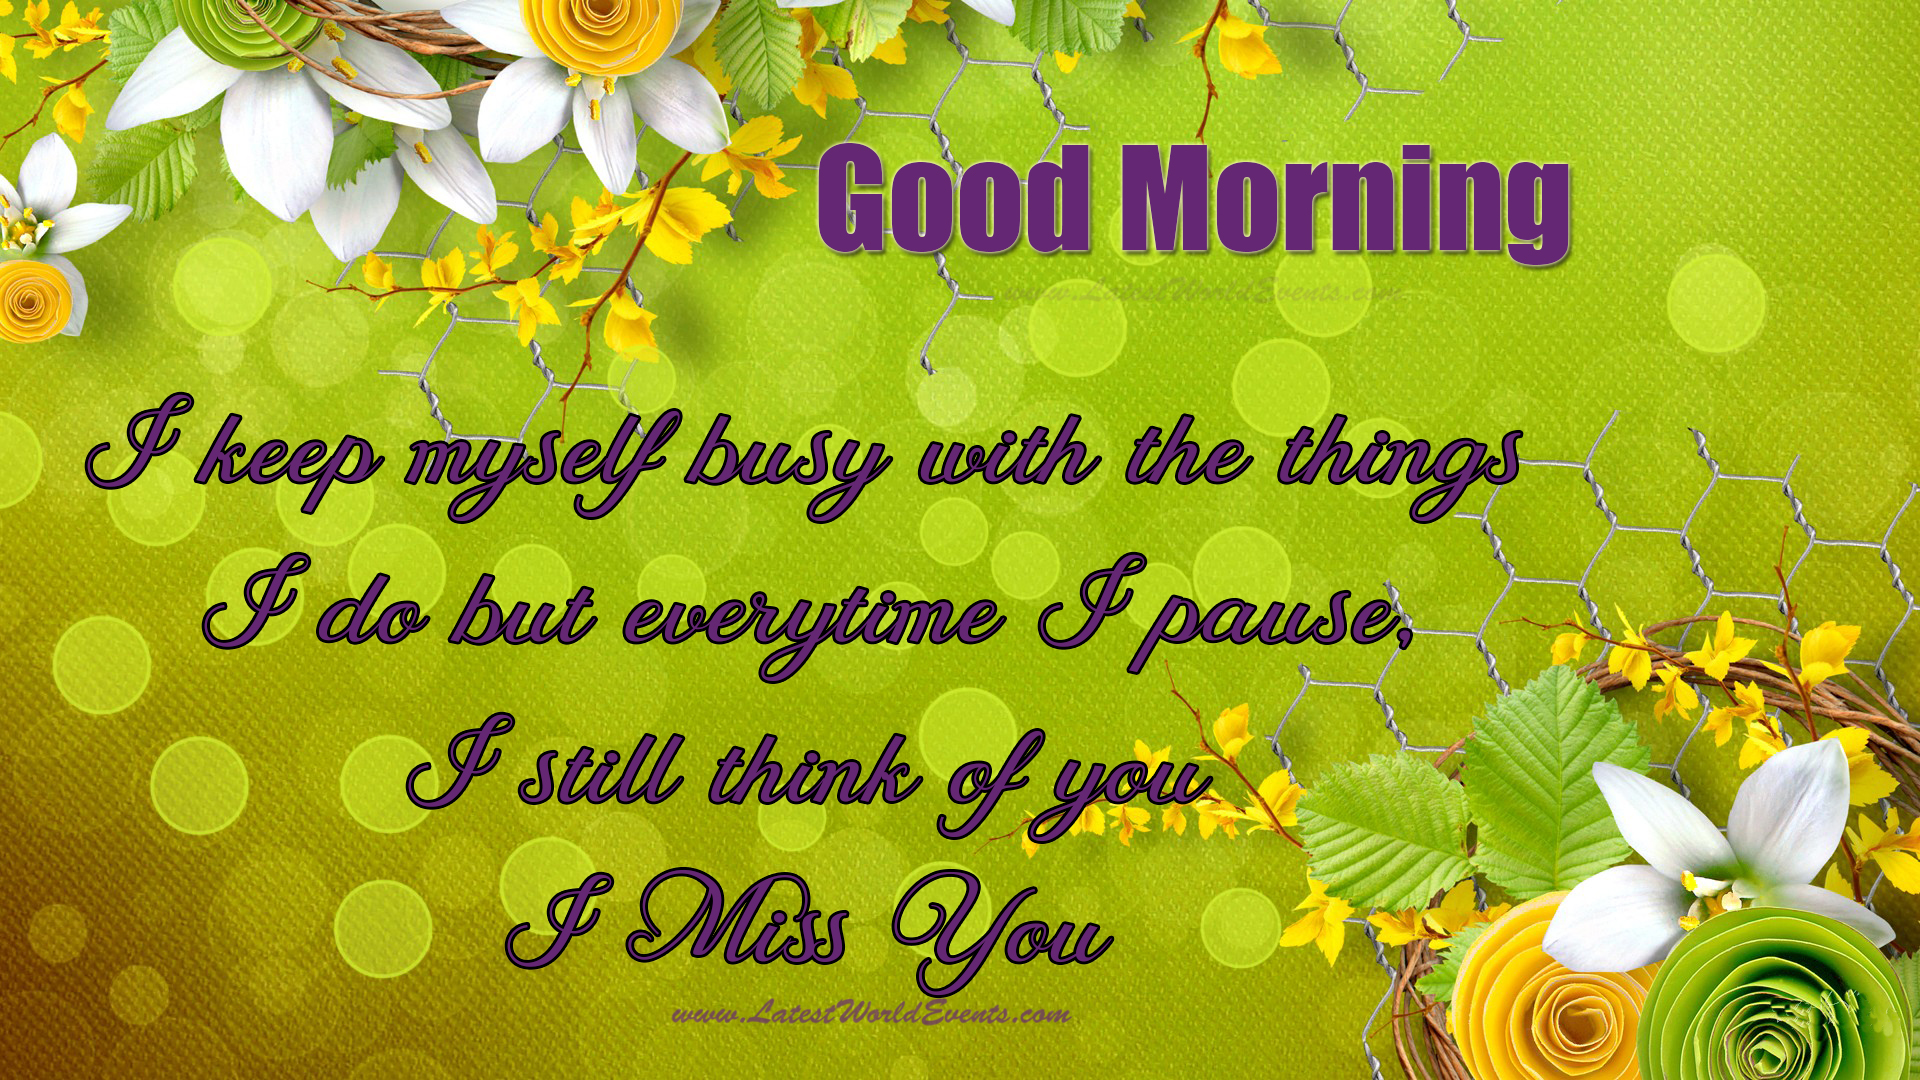 missing-someone-special-good-morning-wishes-quotes